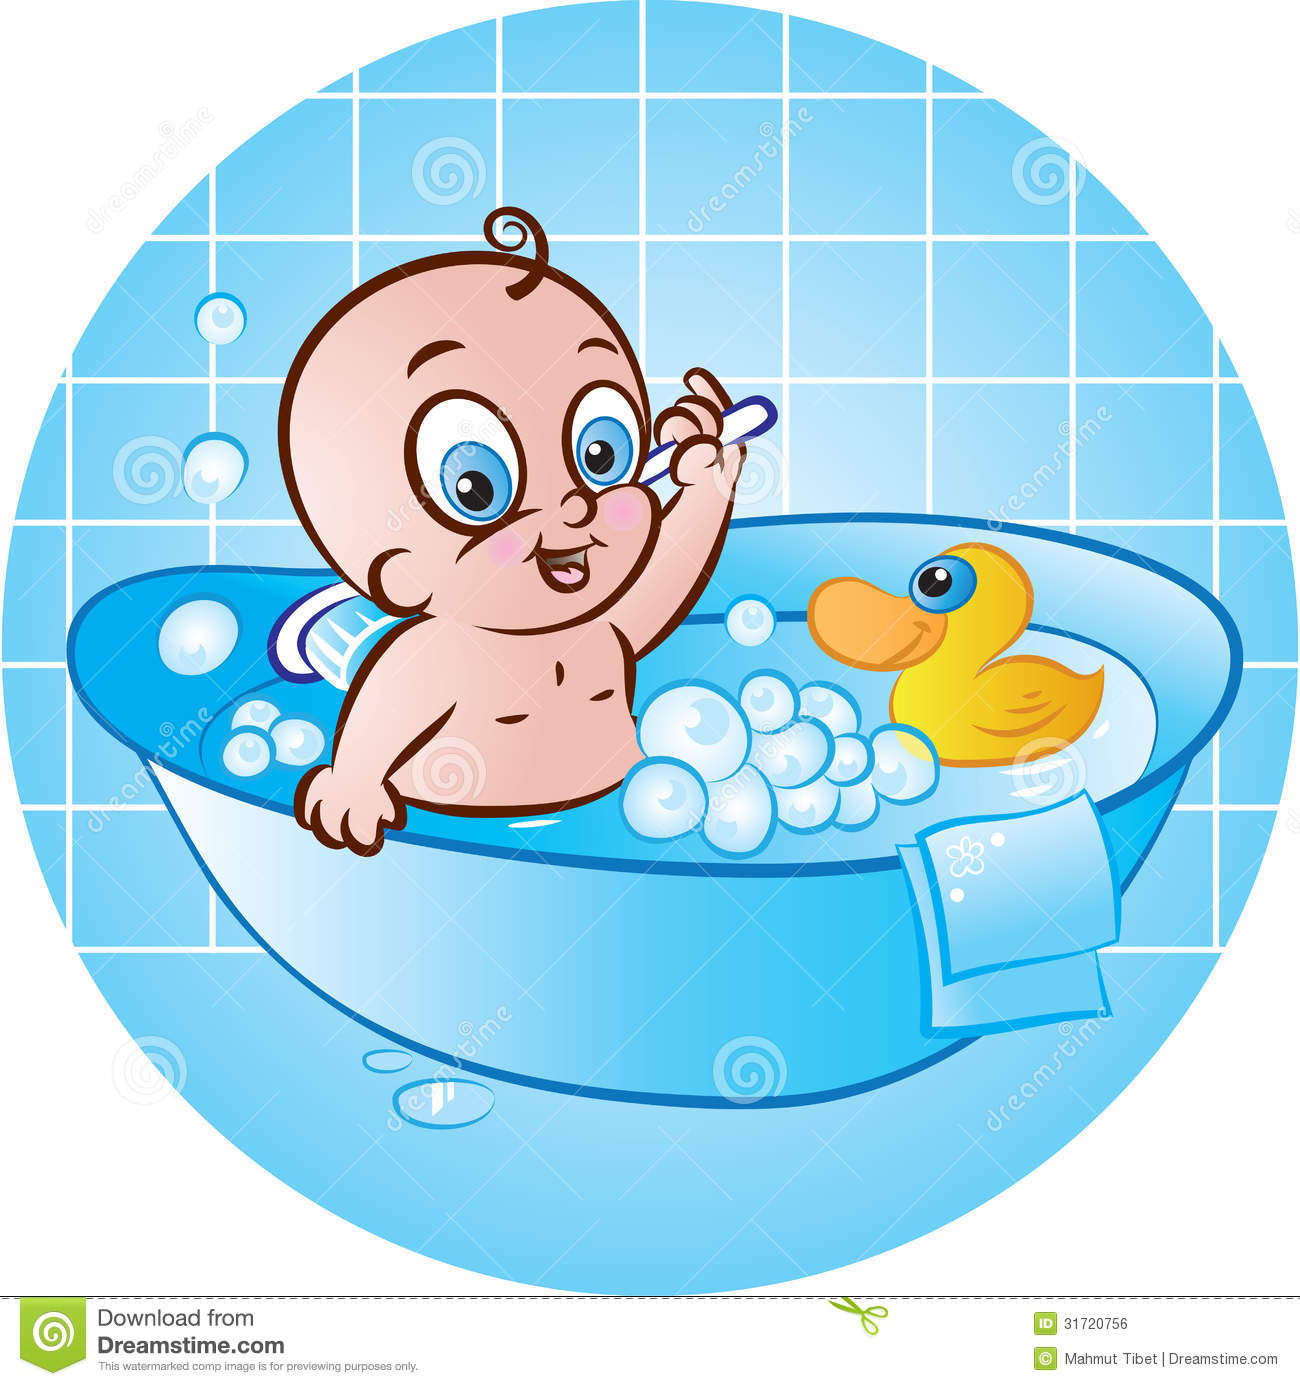 Happy Baby Boy In Tub Royalty Free Stock Image   Image  31720756